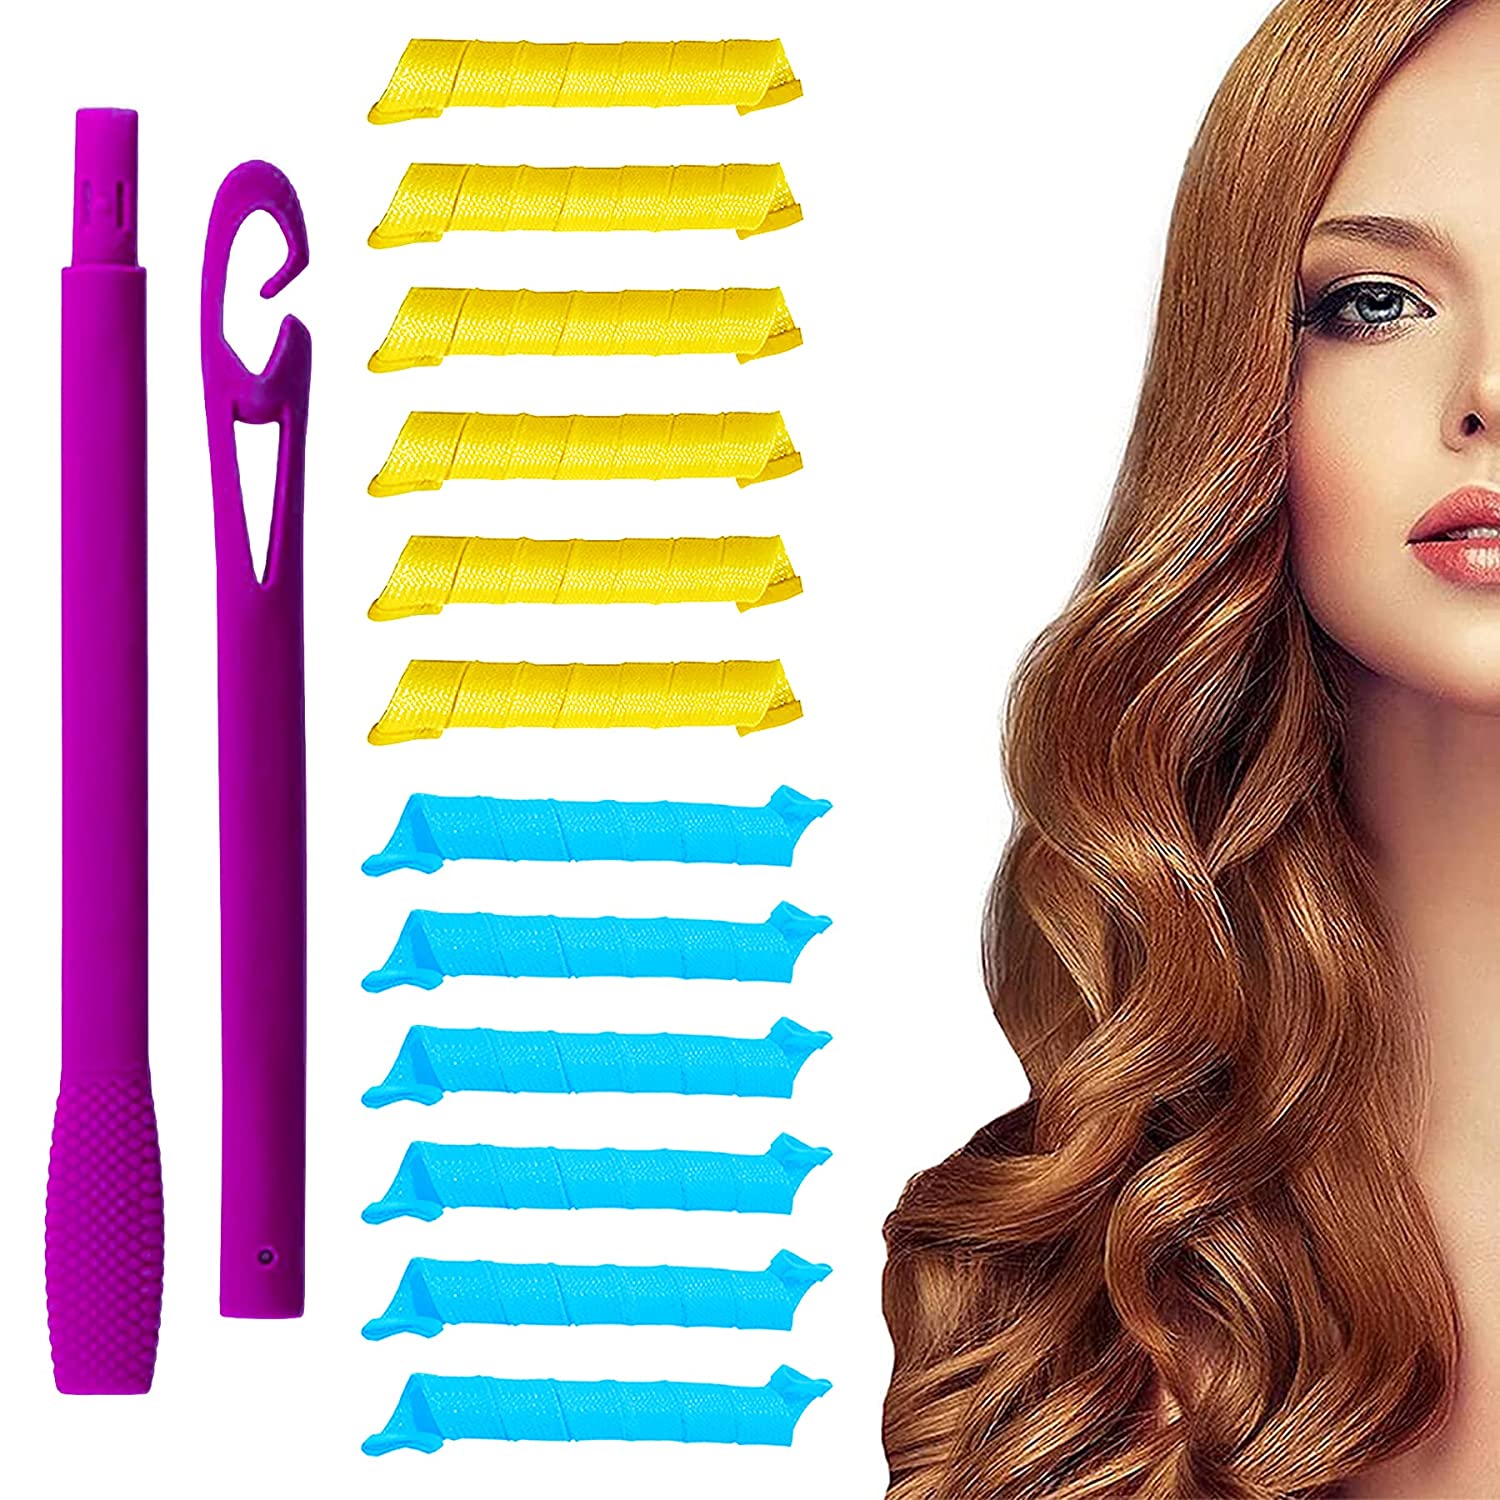 LYYDAN Hair Rollers, Pack of 12 Curls Without Heat, Length 45 cm Diameter 3.2 cm, Spiral Curlers Overnight with Styling Hooks, Curlers Large Curls for Long Hair, 